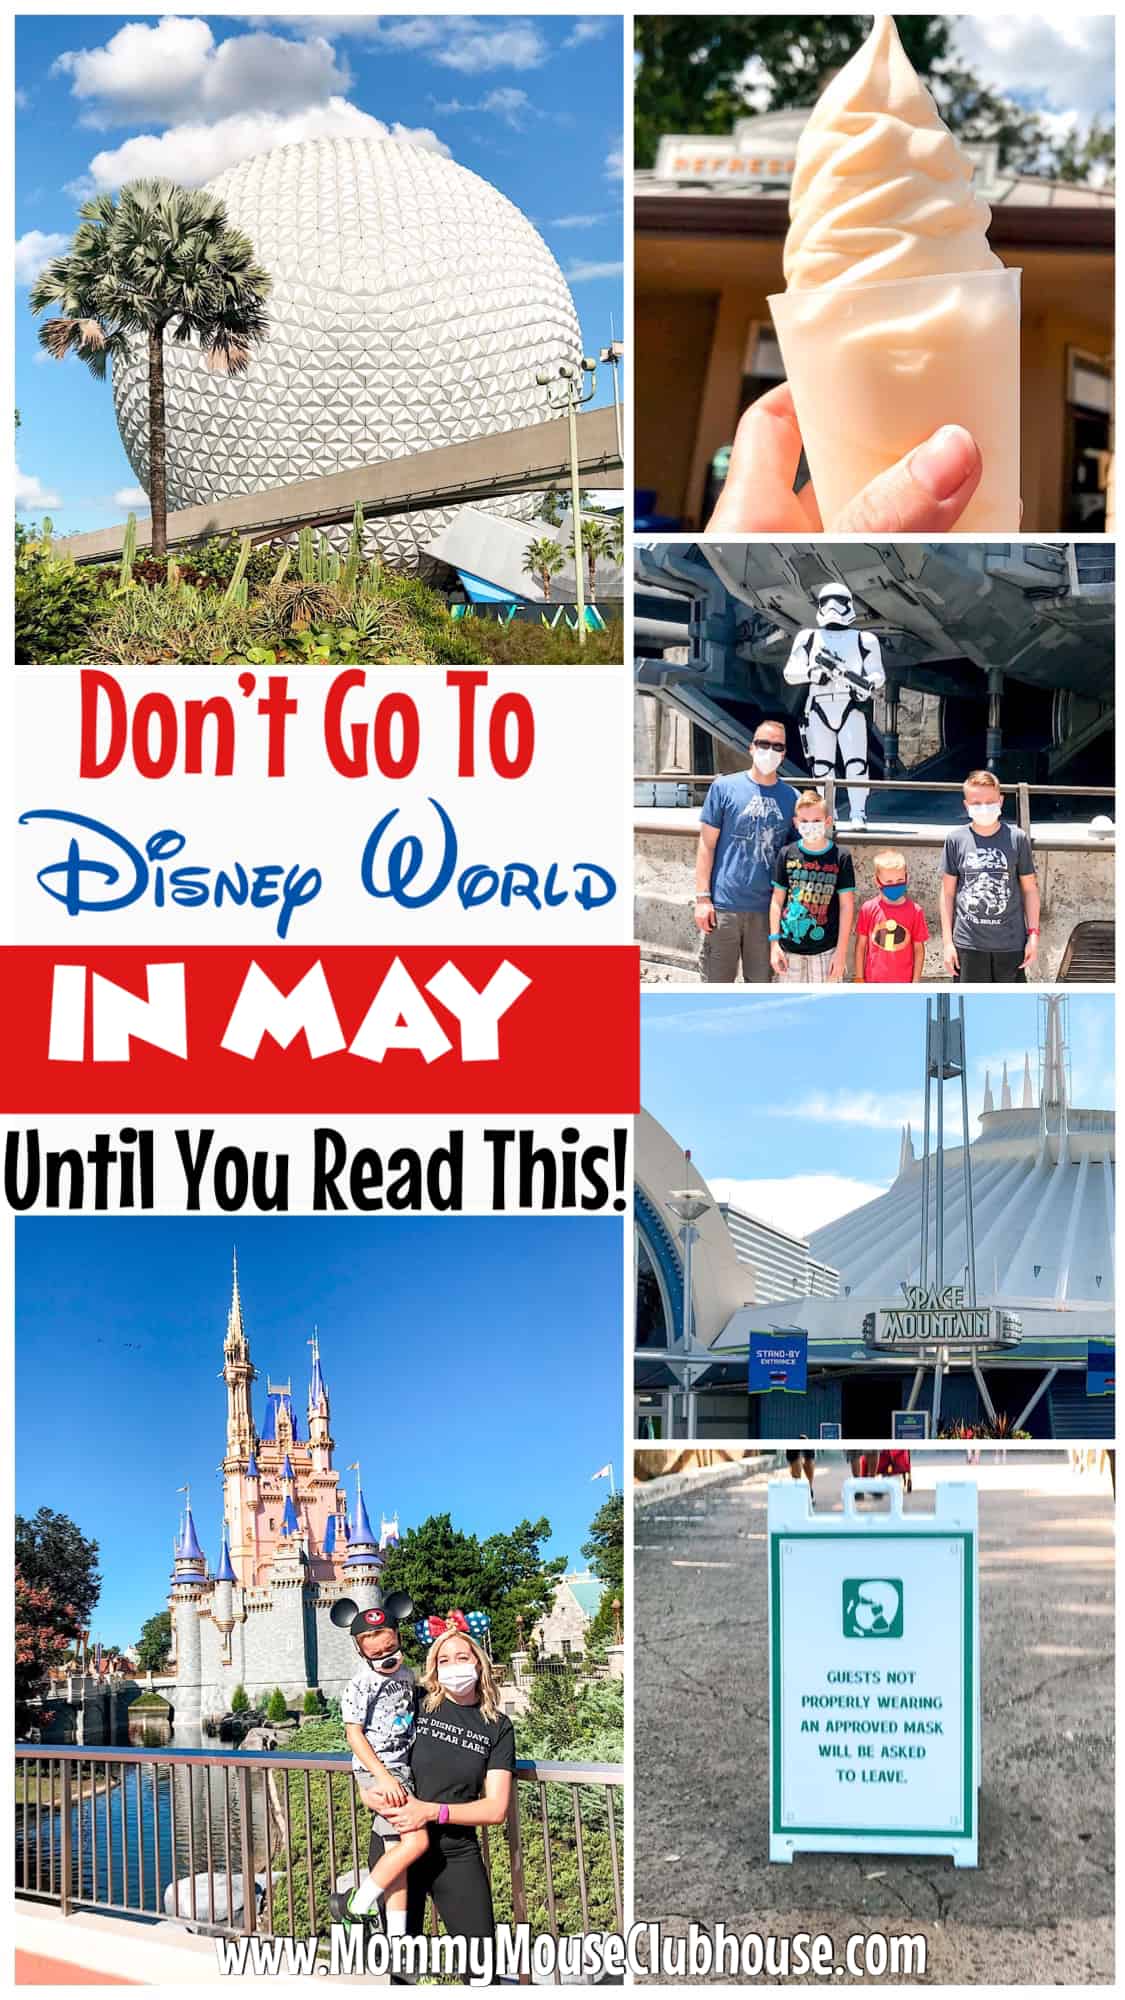 A collage of images at Disney World in May.